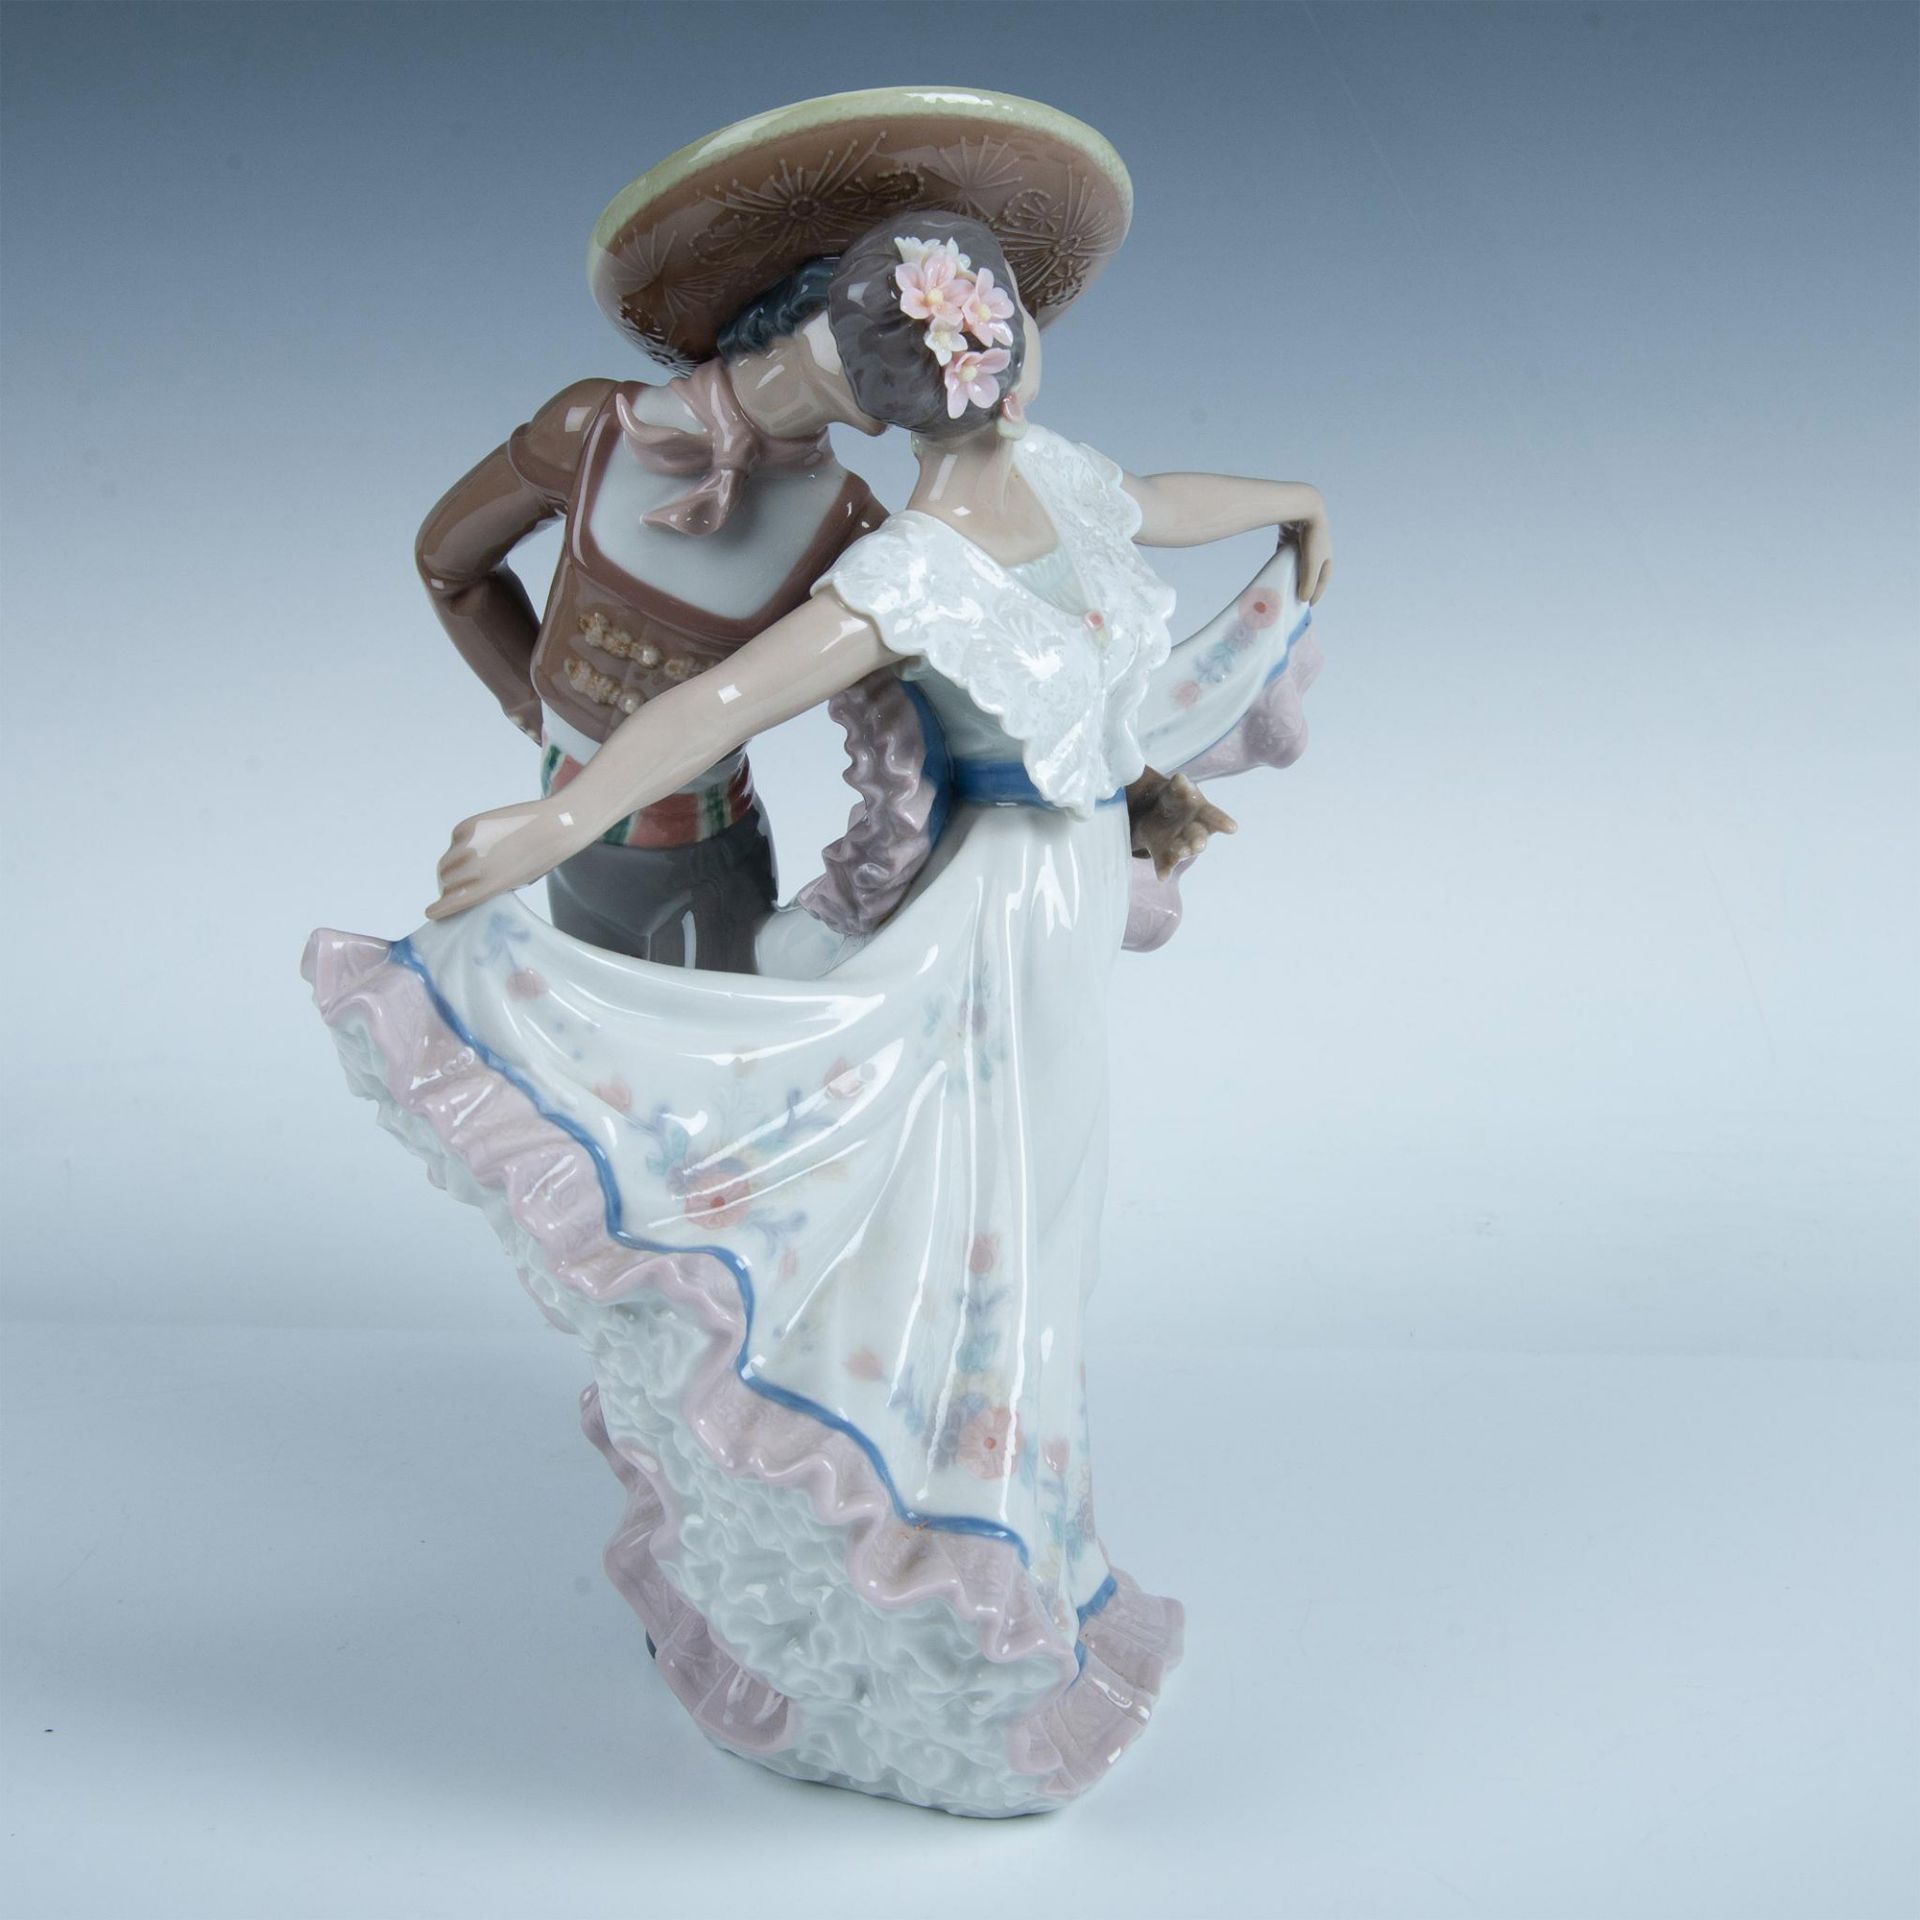 Mexican Dancers 1005415 - Lladro Porcelain Figurine - Image 6 of 8